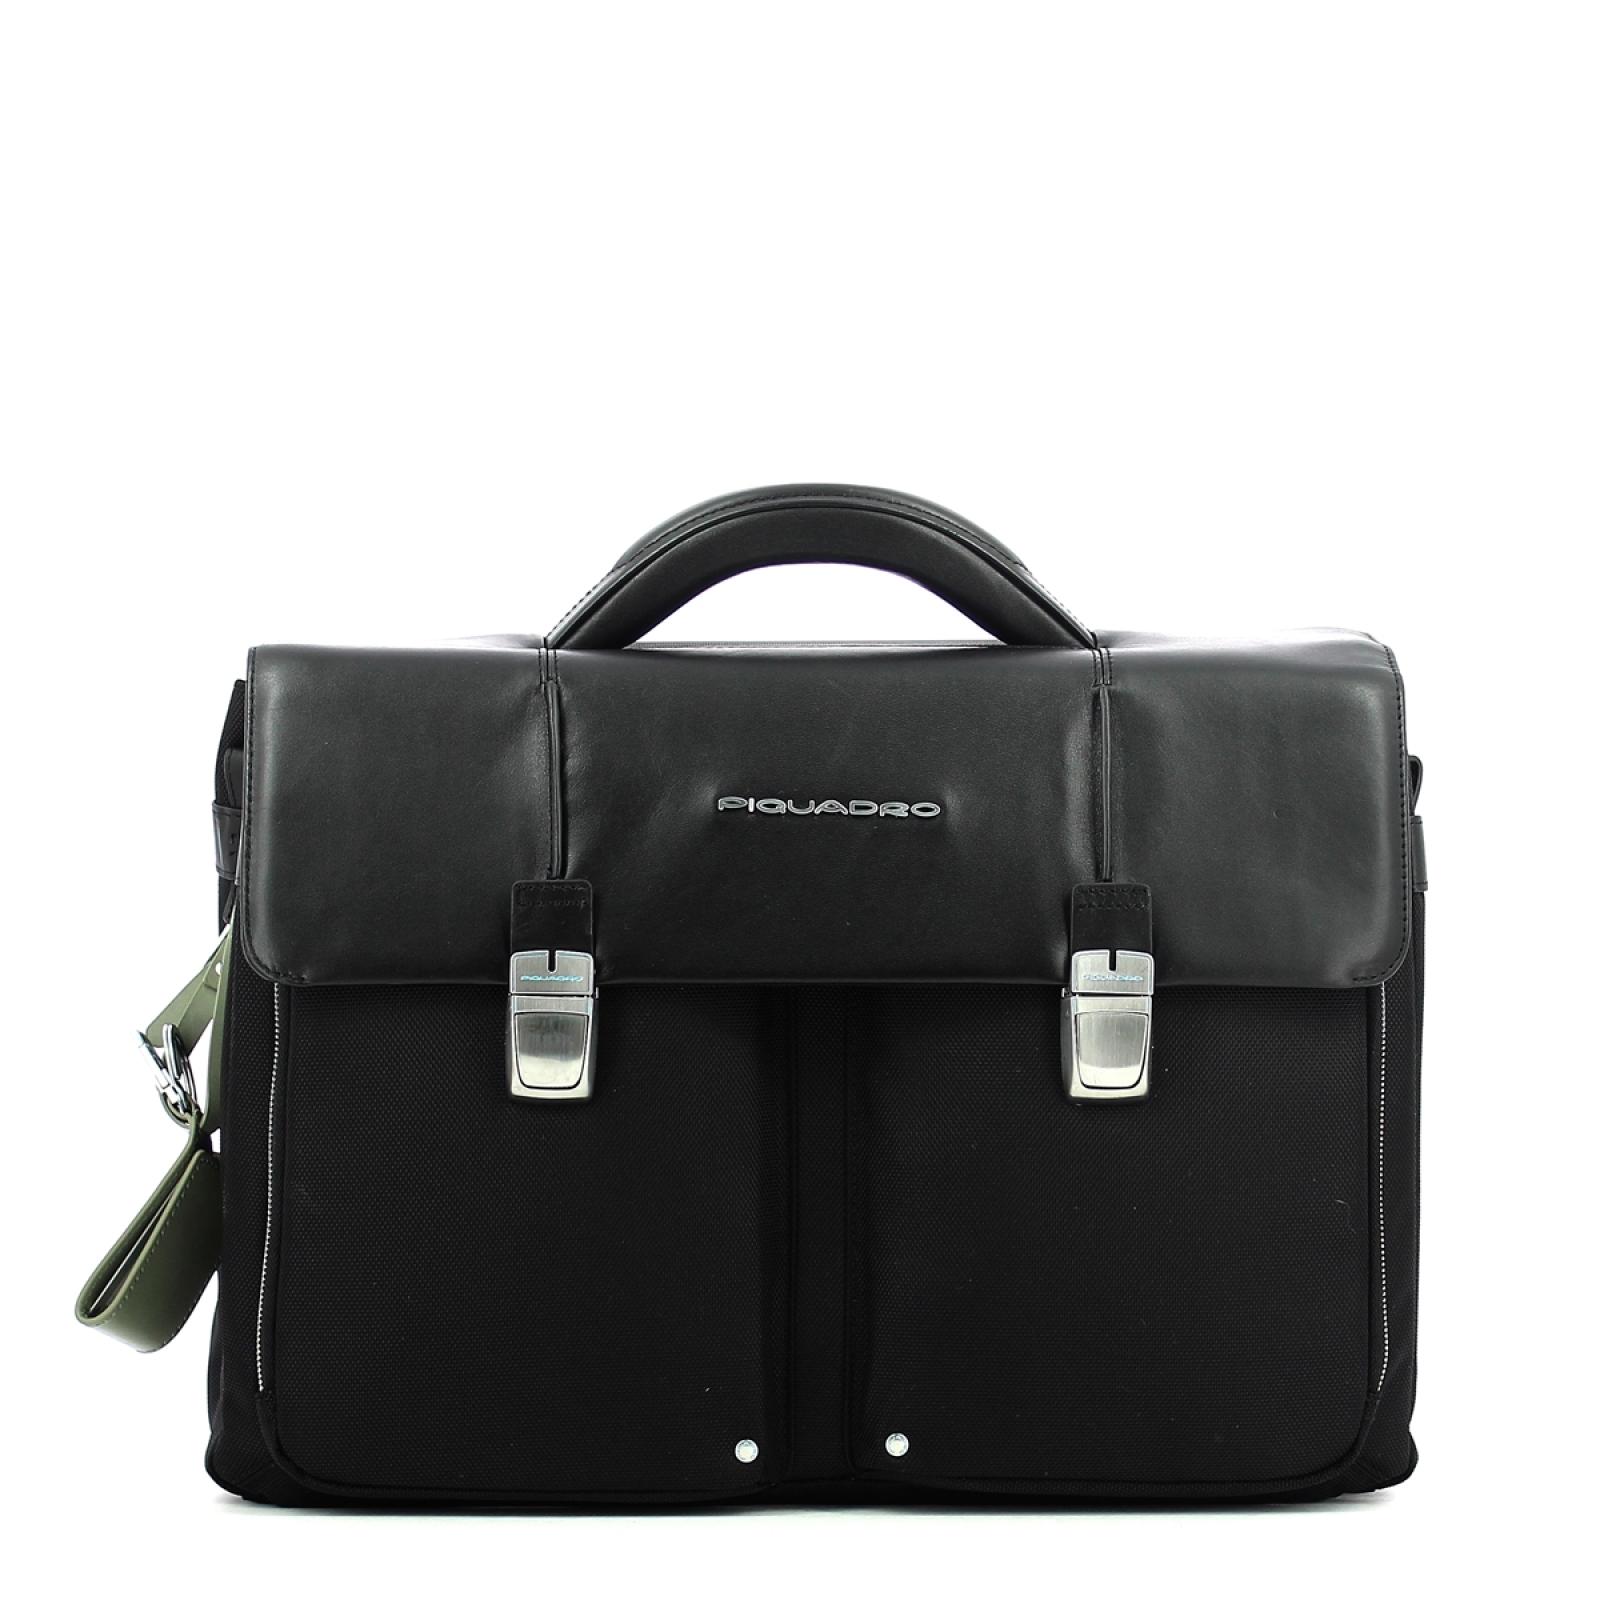 Laptopbag Two Gussets Link-NERO-UN